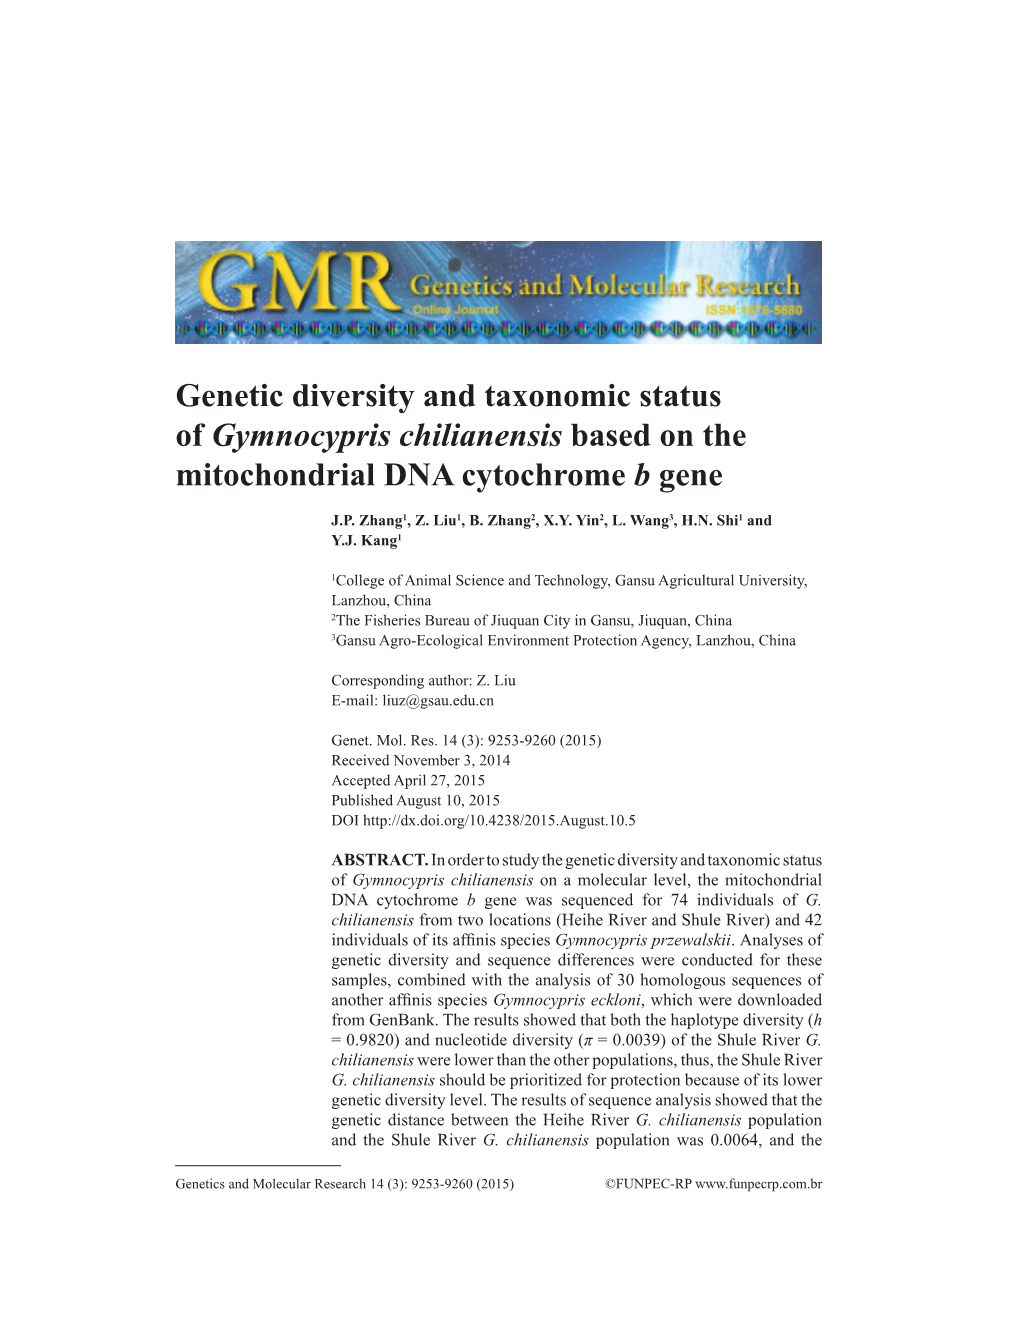 Genetic Diversity and Taxonomic Status of Gymnocypris Chilianensis Based on the Mitochondrial DNA Cytochrome B Gene